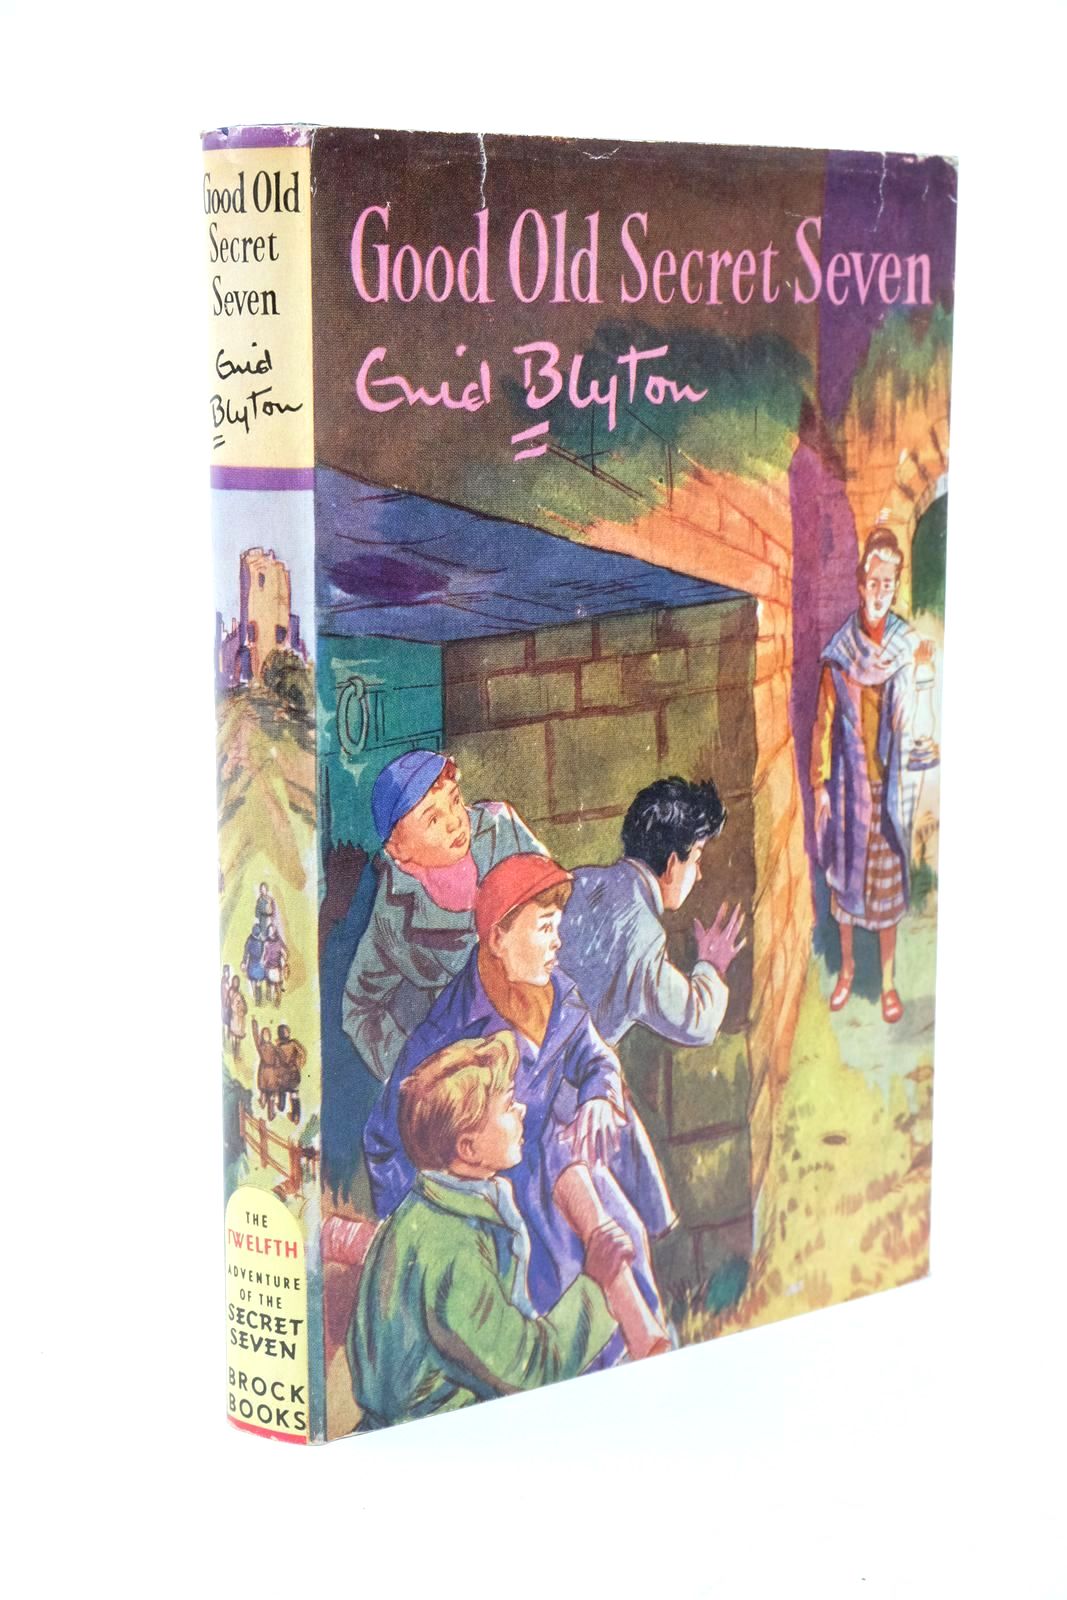 Photo of GOOD OLD SECRET SEVEN written by Blyton, Enid illustrated by Sharrocks, Burgess published by Brockhampton Press (STOCK CODE: 1322780)  for sale by Stella & Rose's Books